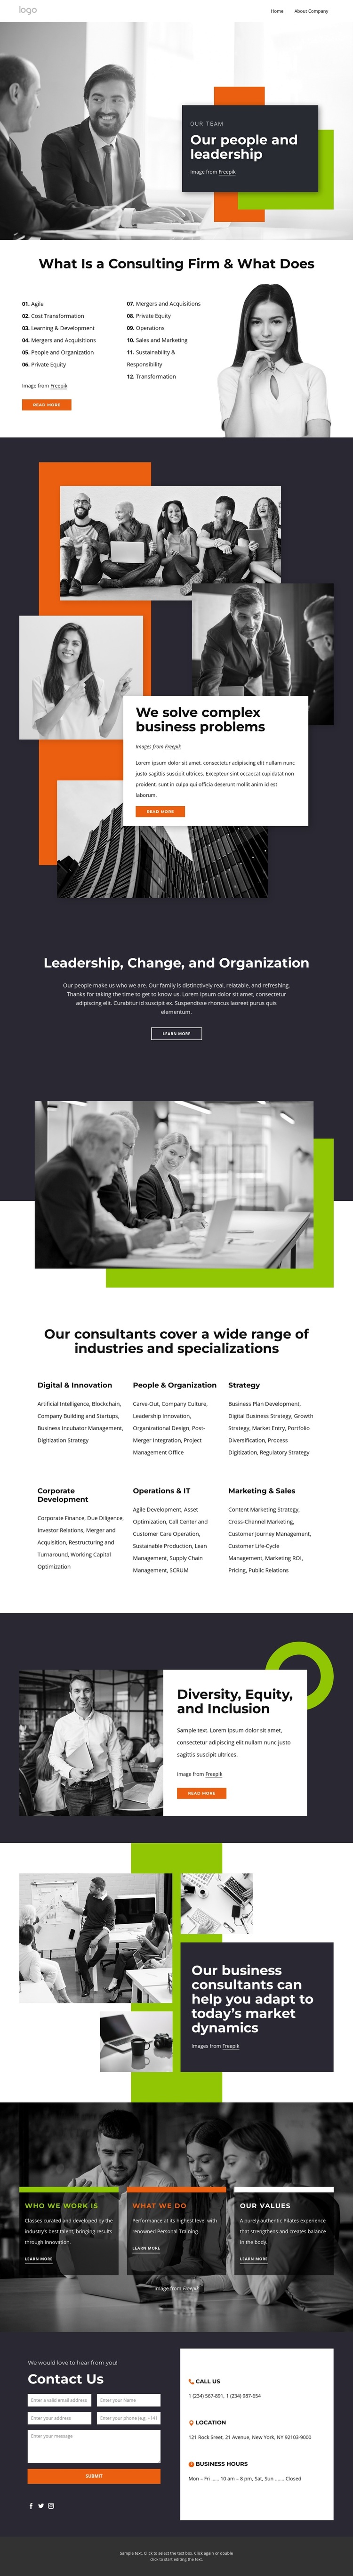 Our people, partners and leadership HTML5 Template